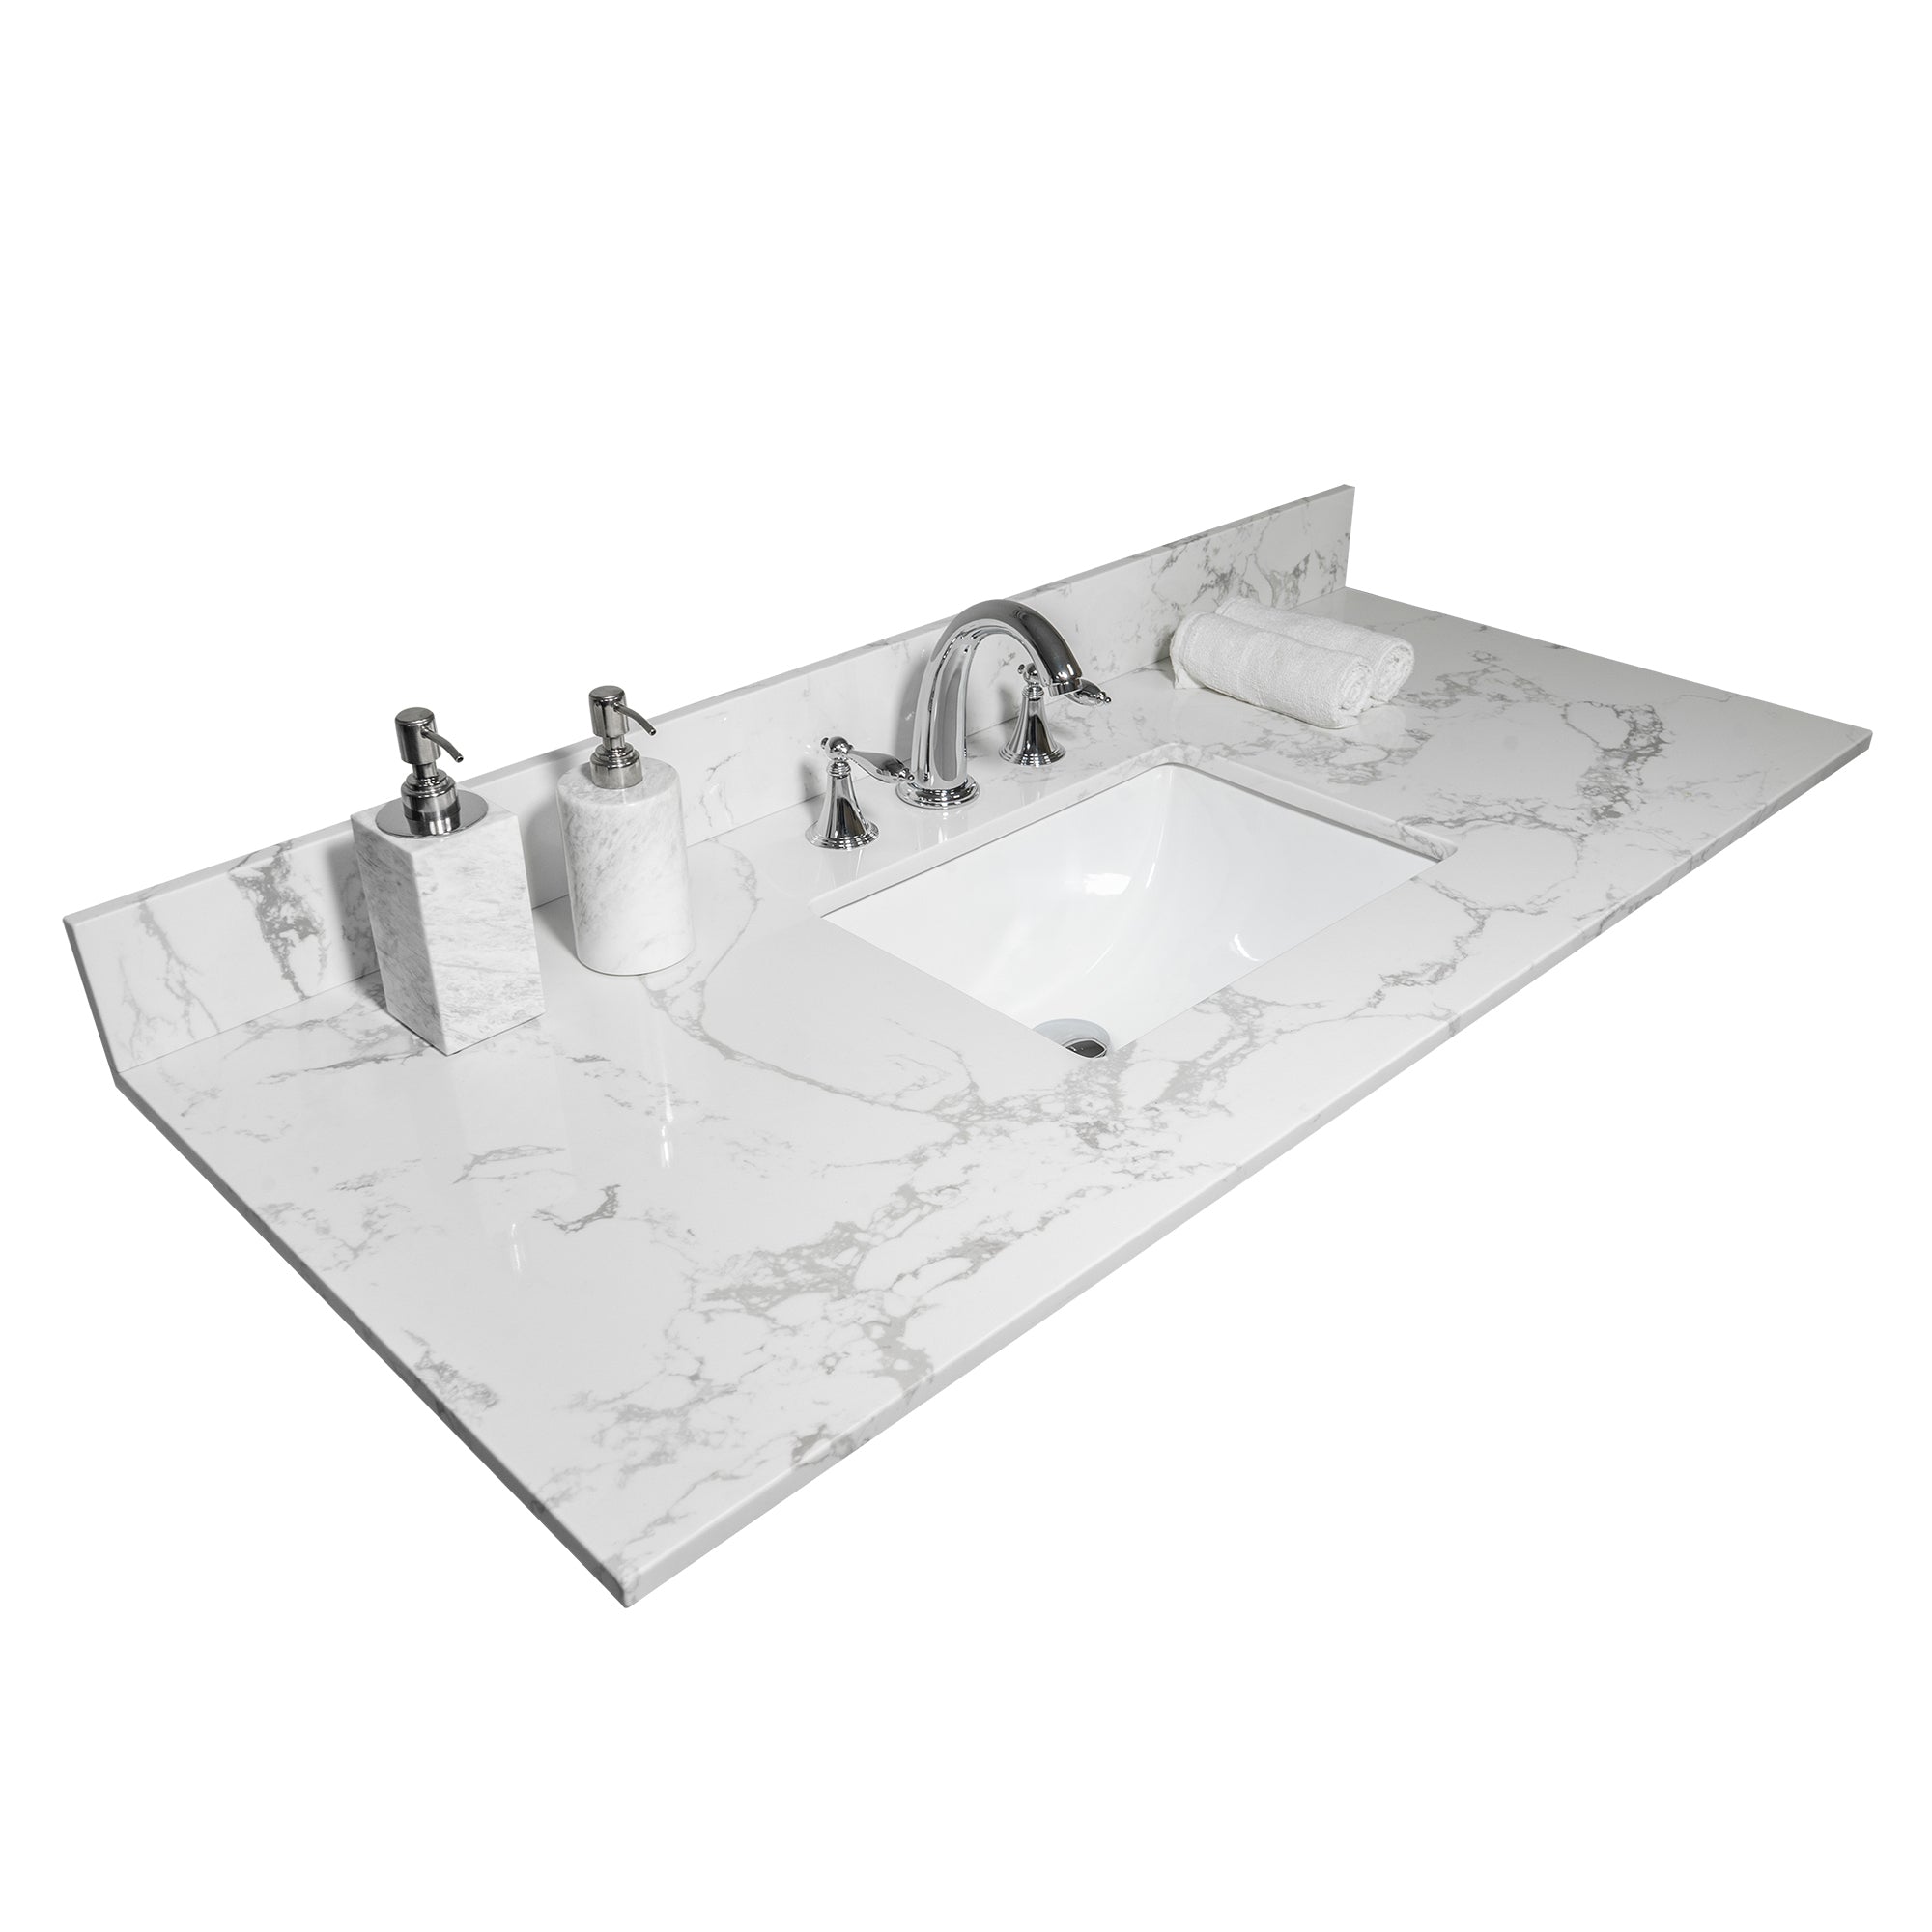 43" x 22" bathroom stone vanity top  engineered stone carrara white marble color with rectangle undermount ceramic sink and  3 faucet hole with back splash .